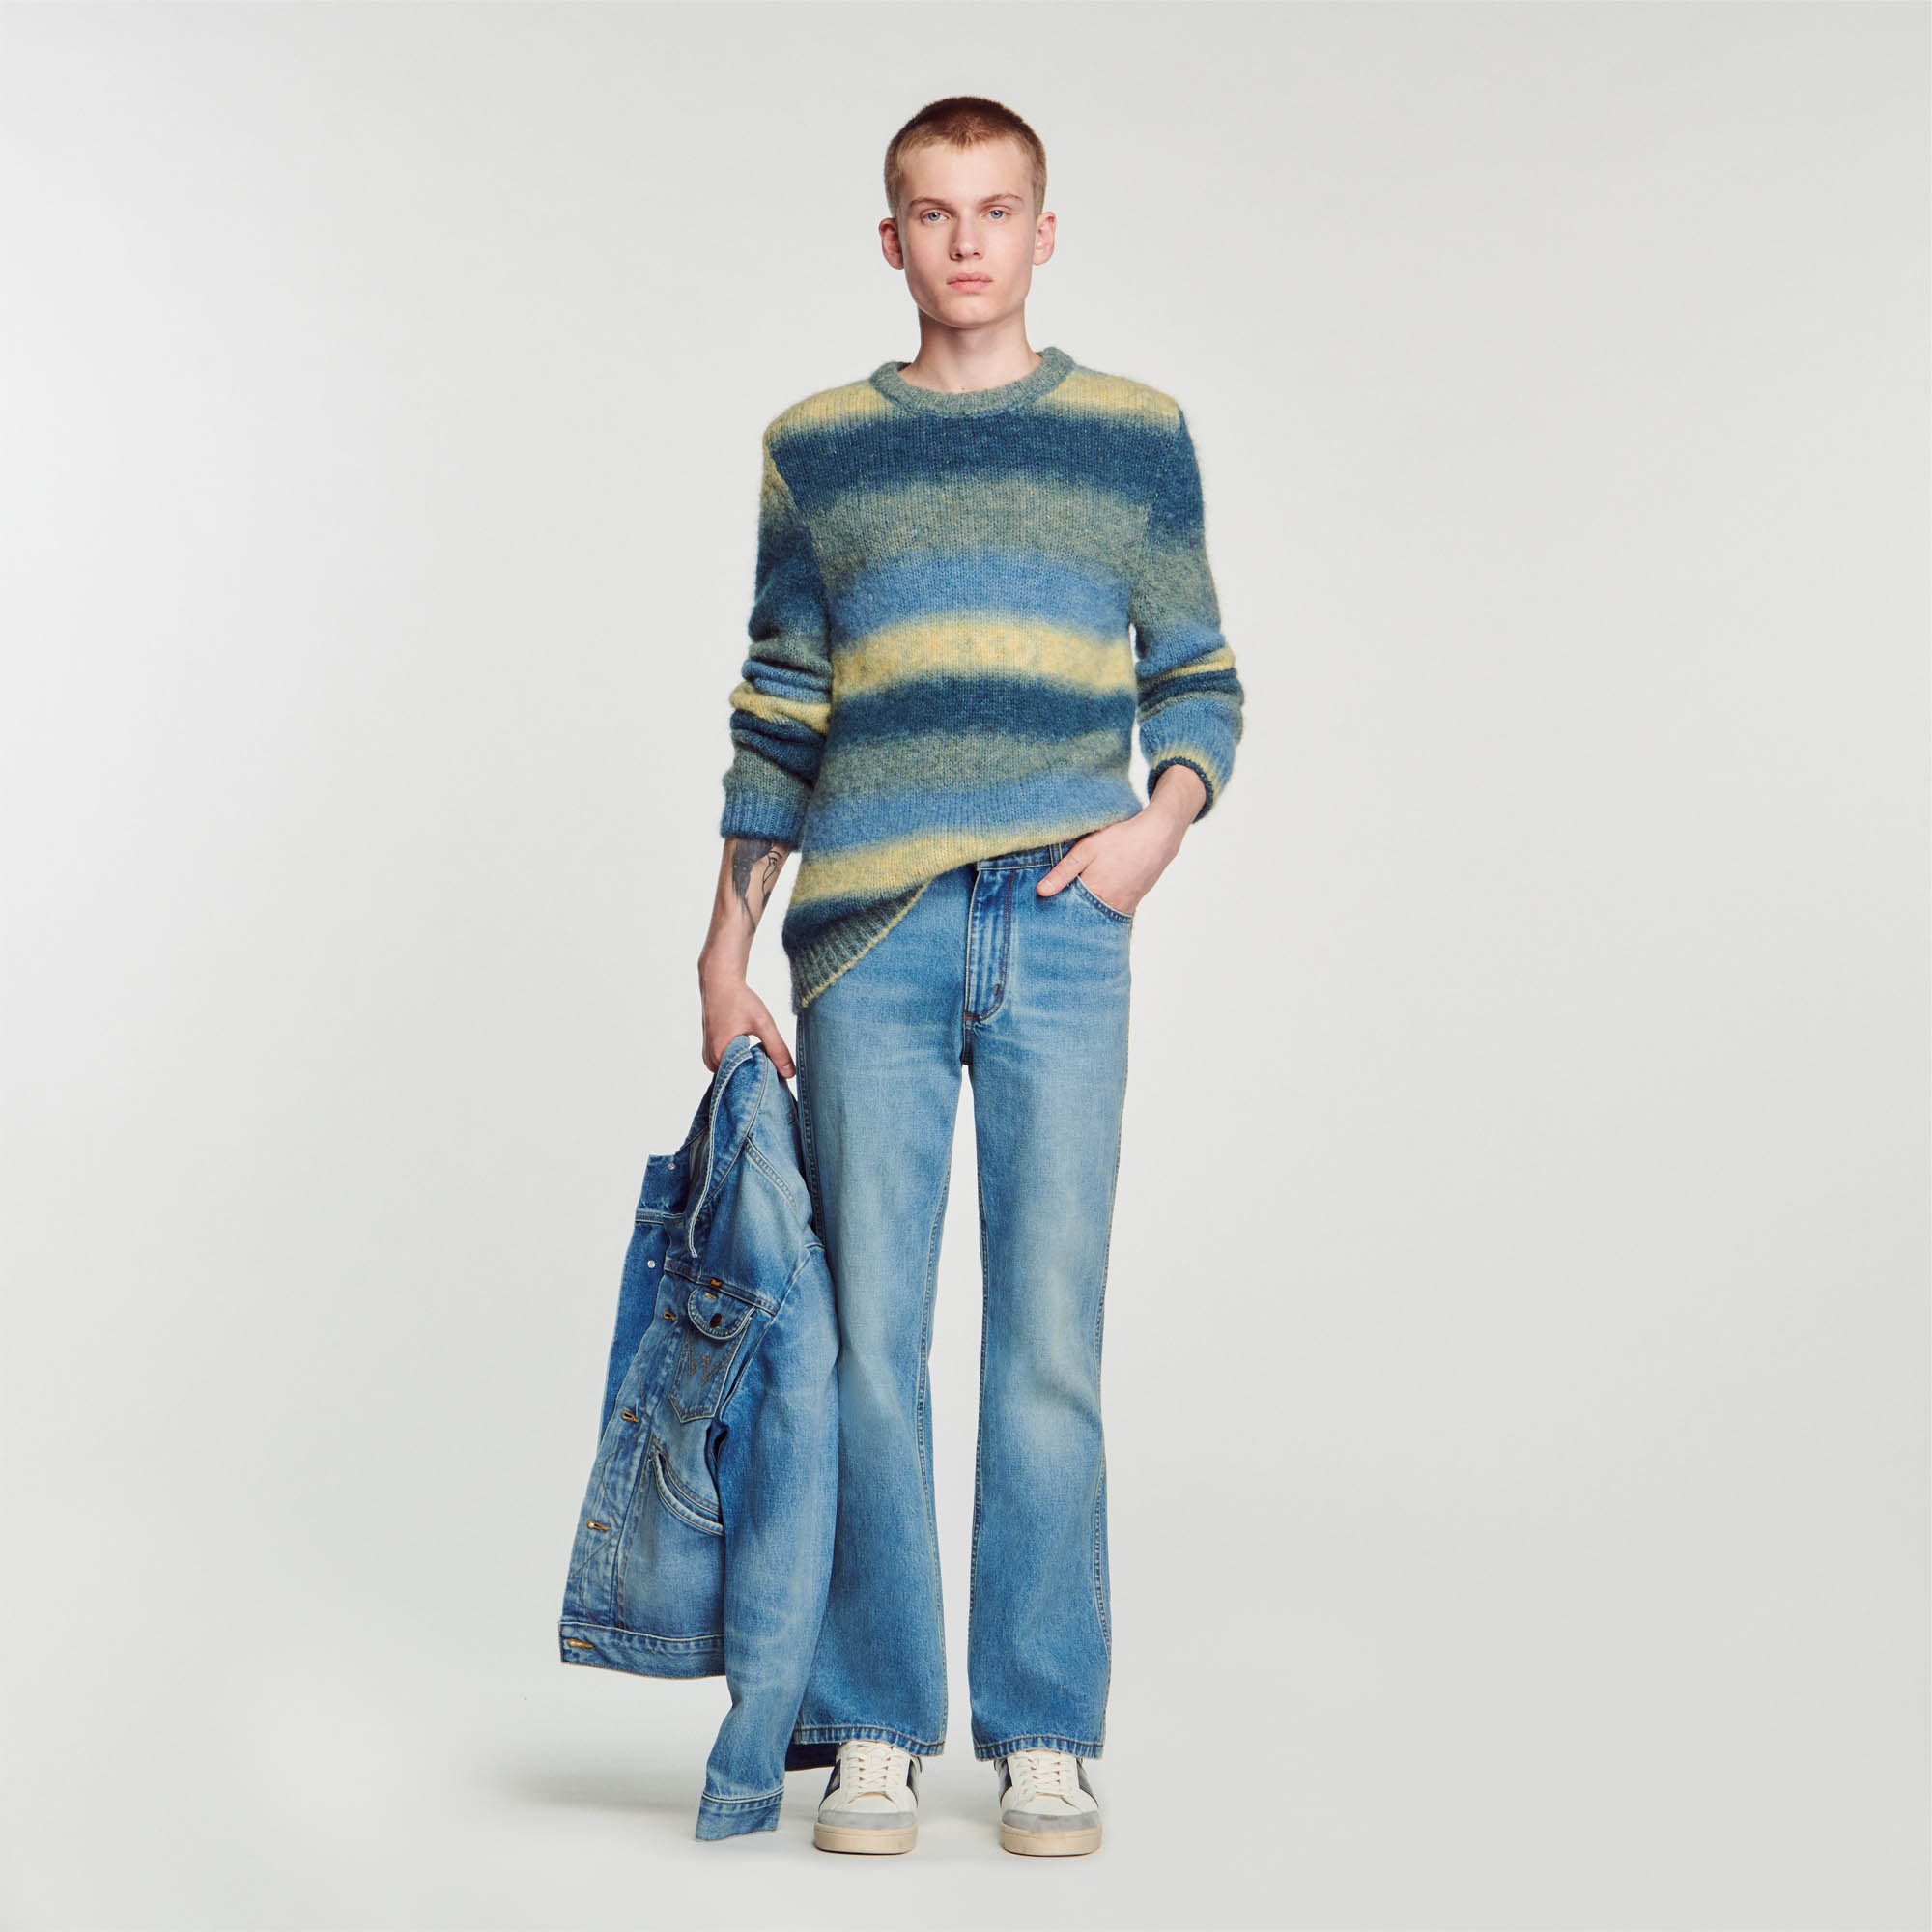 Sandro wool Wool and alpaca blend sweater with round neck, long sleeves and embellished with a stripy pattern